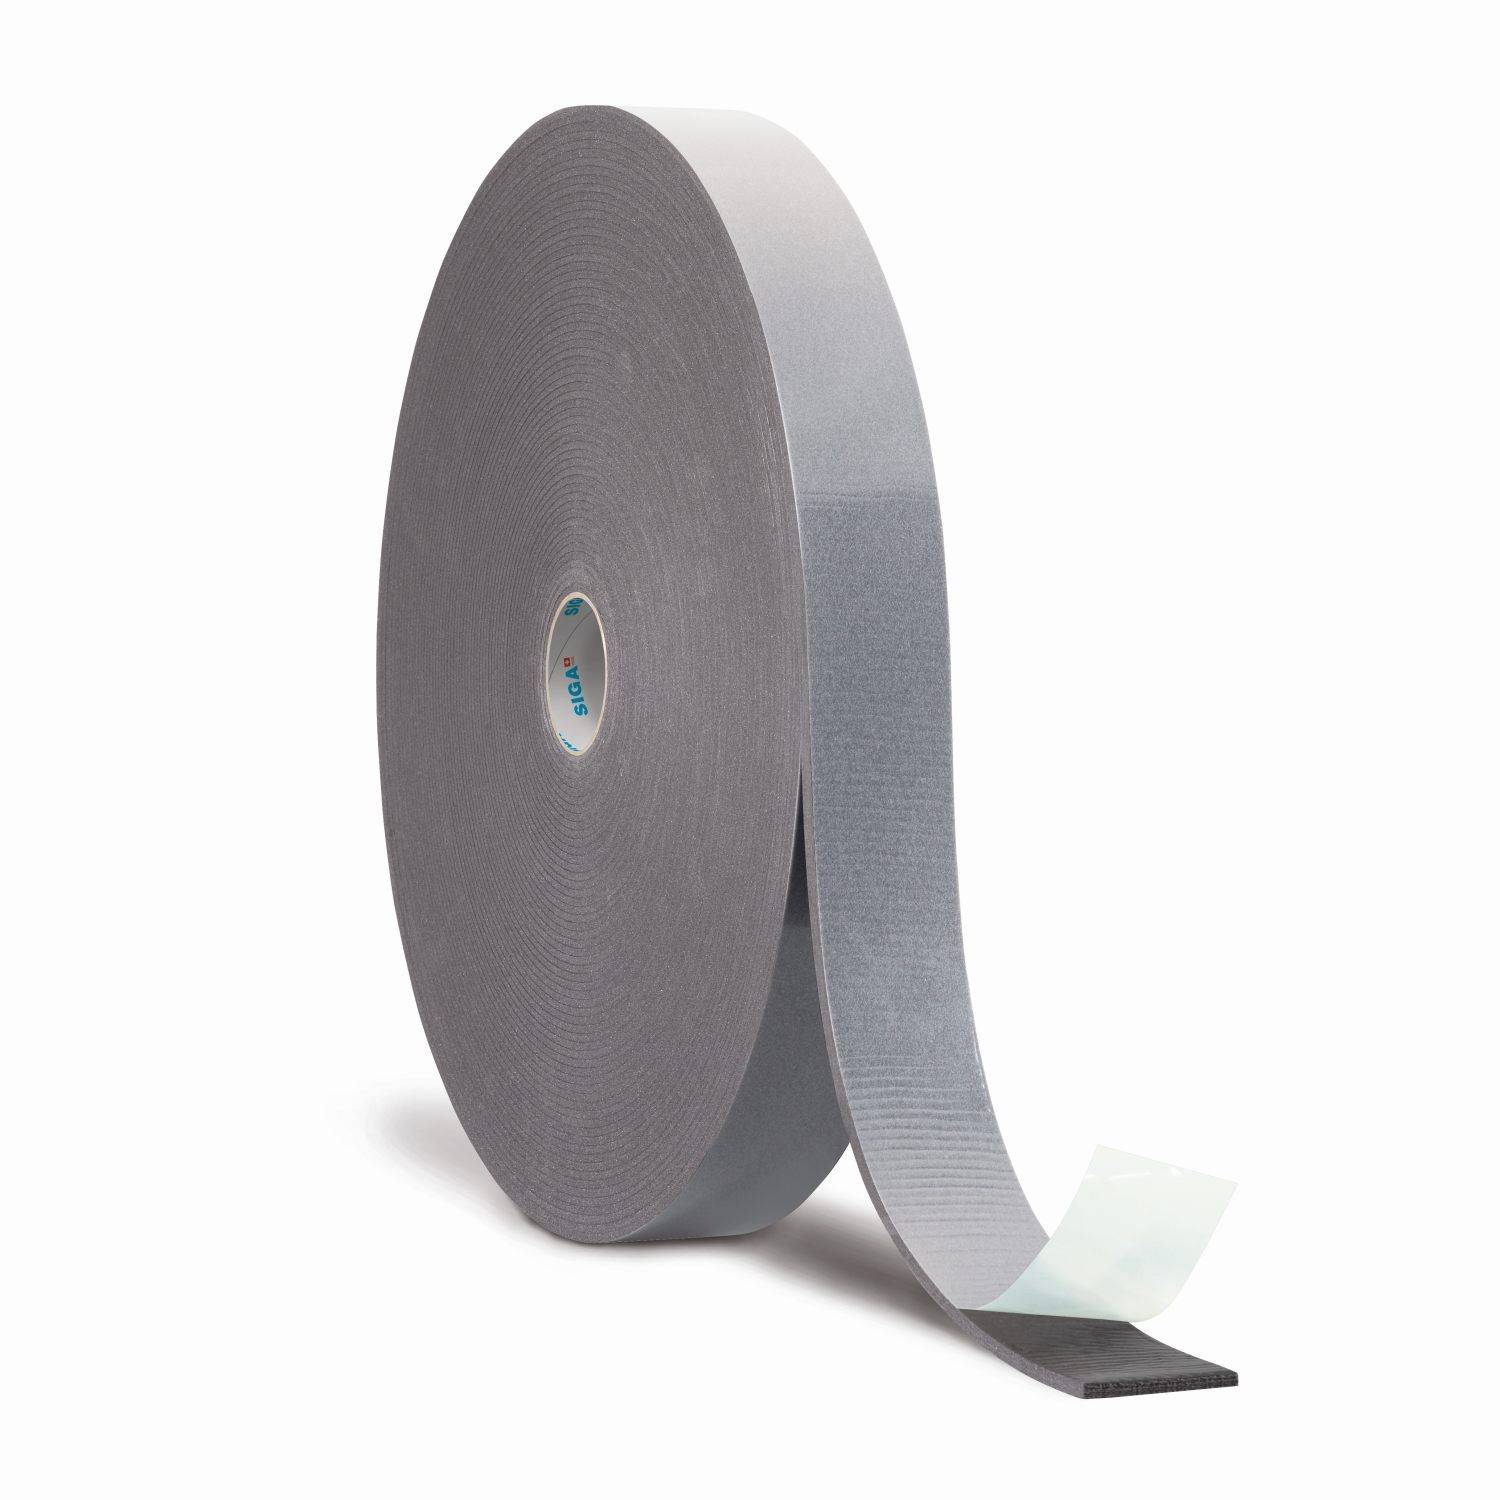 Nail Sealing Tape (For sealing roof batten penetrations) - Protective Foam Tape